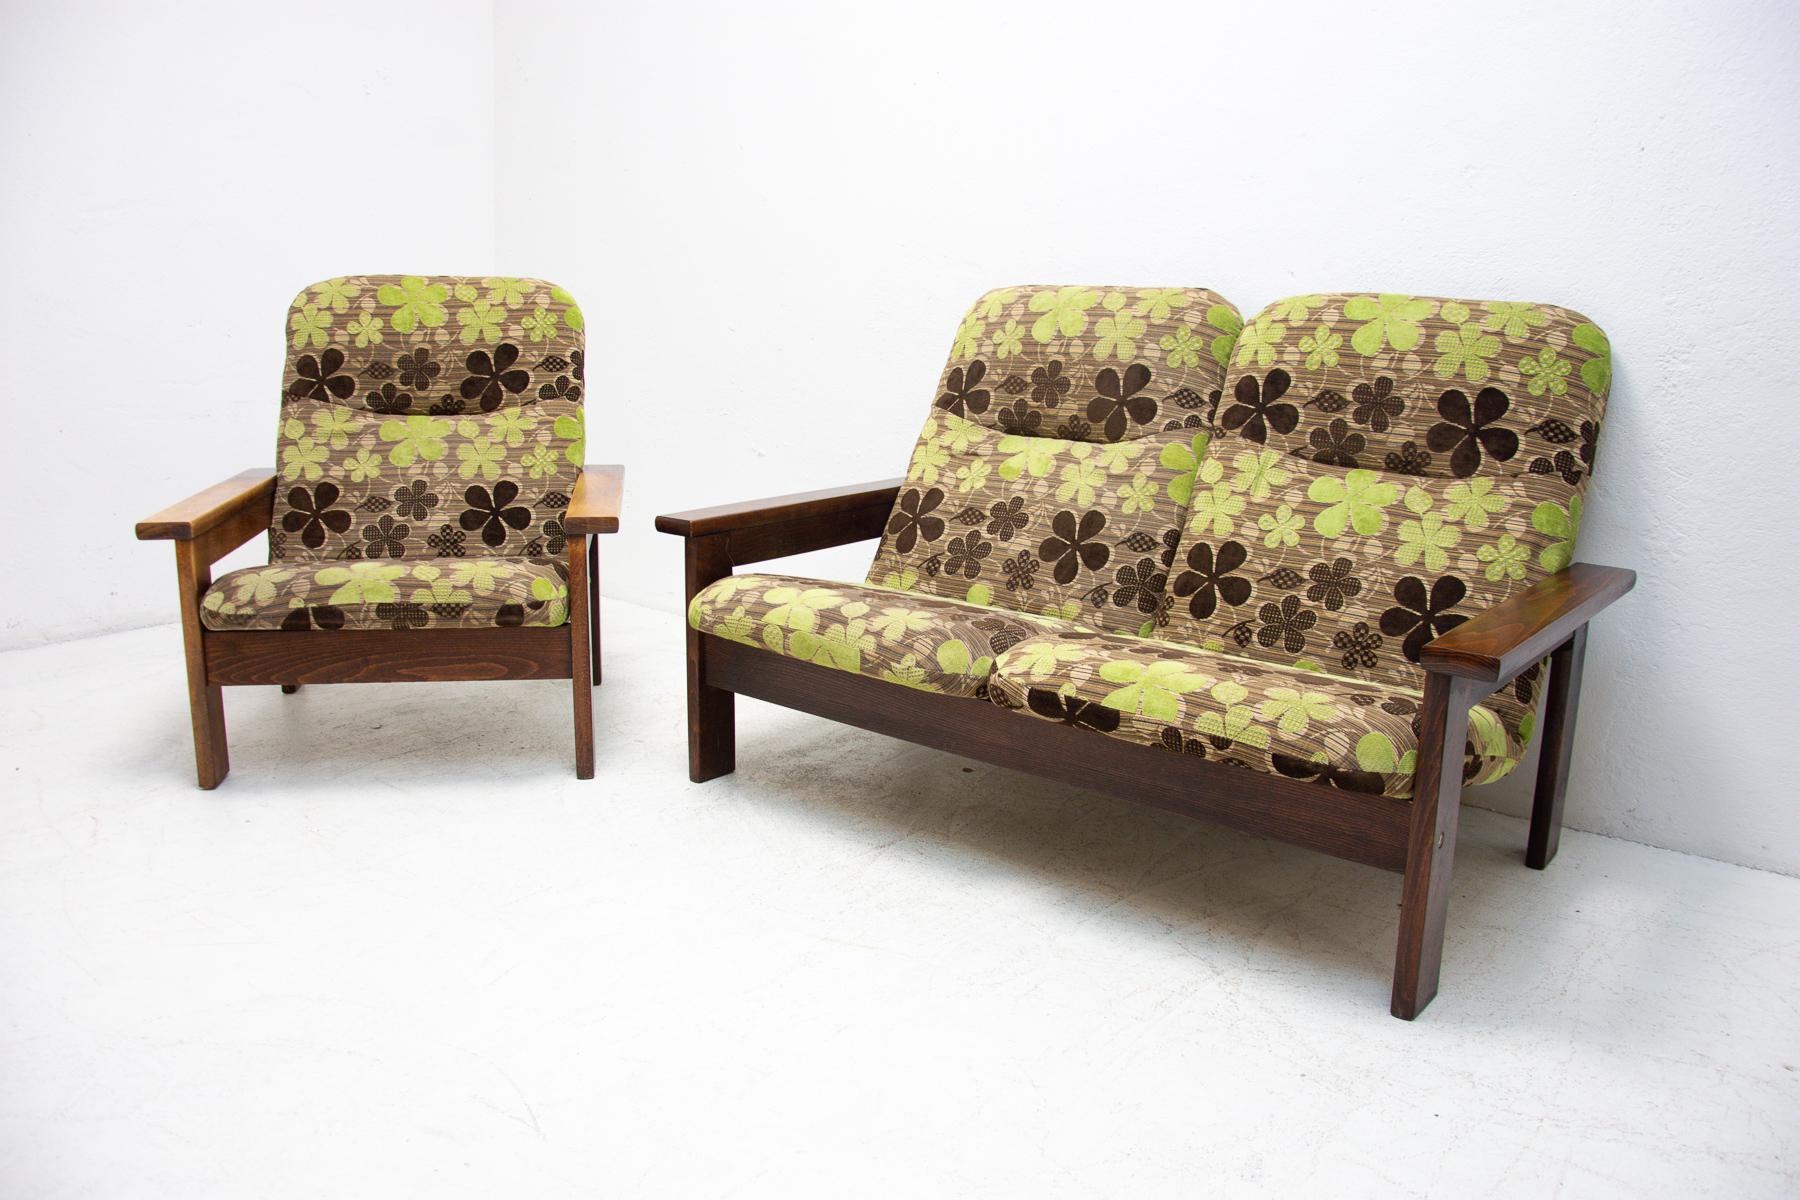 Vintage Scandinavian Style Seating Set, 1980's In Good Condition For Sale In Prague 8, CZ